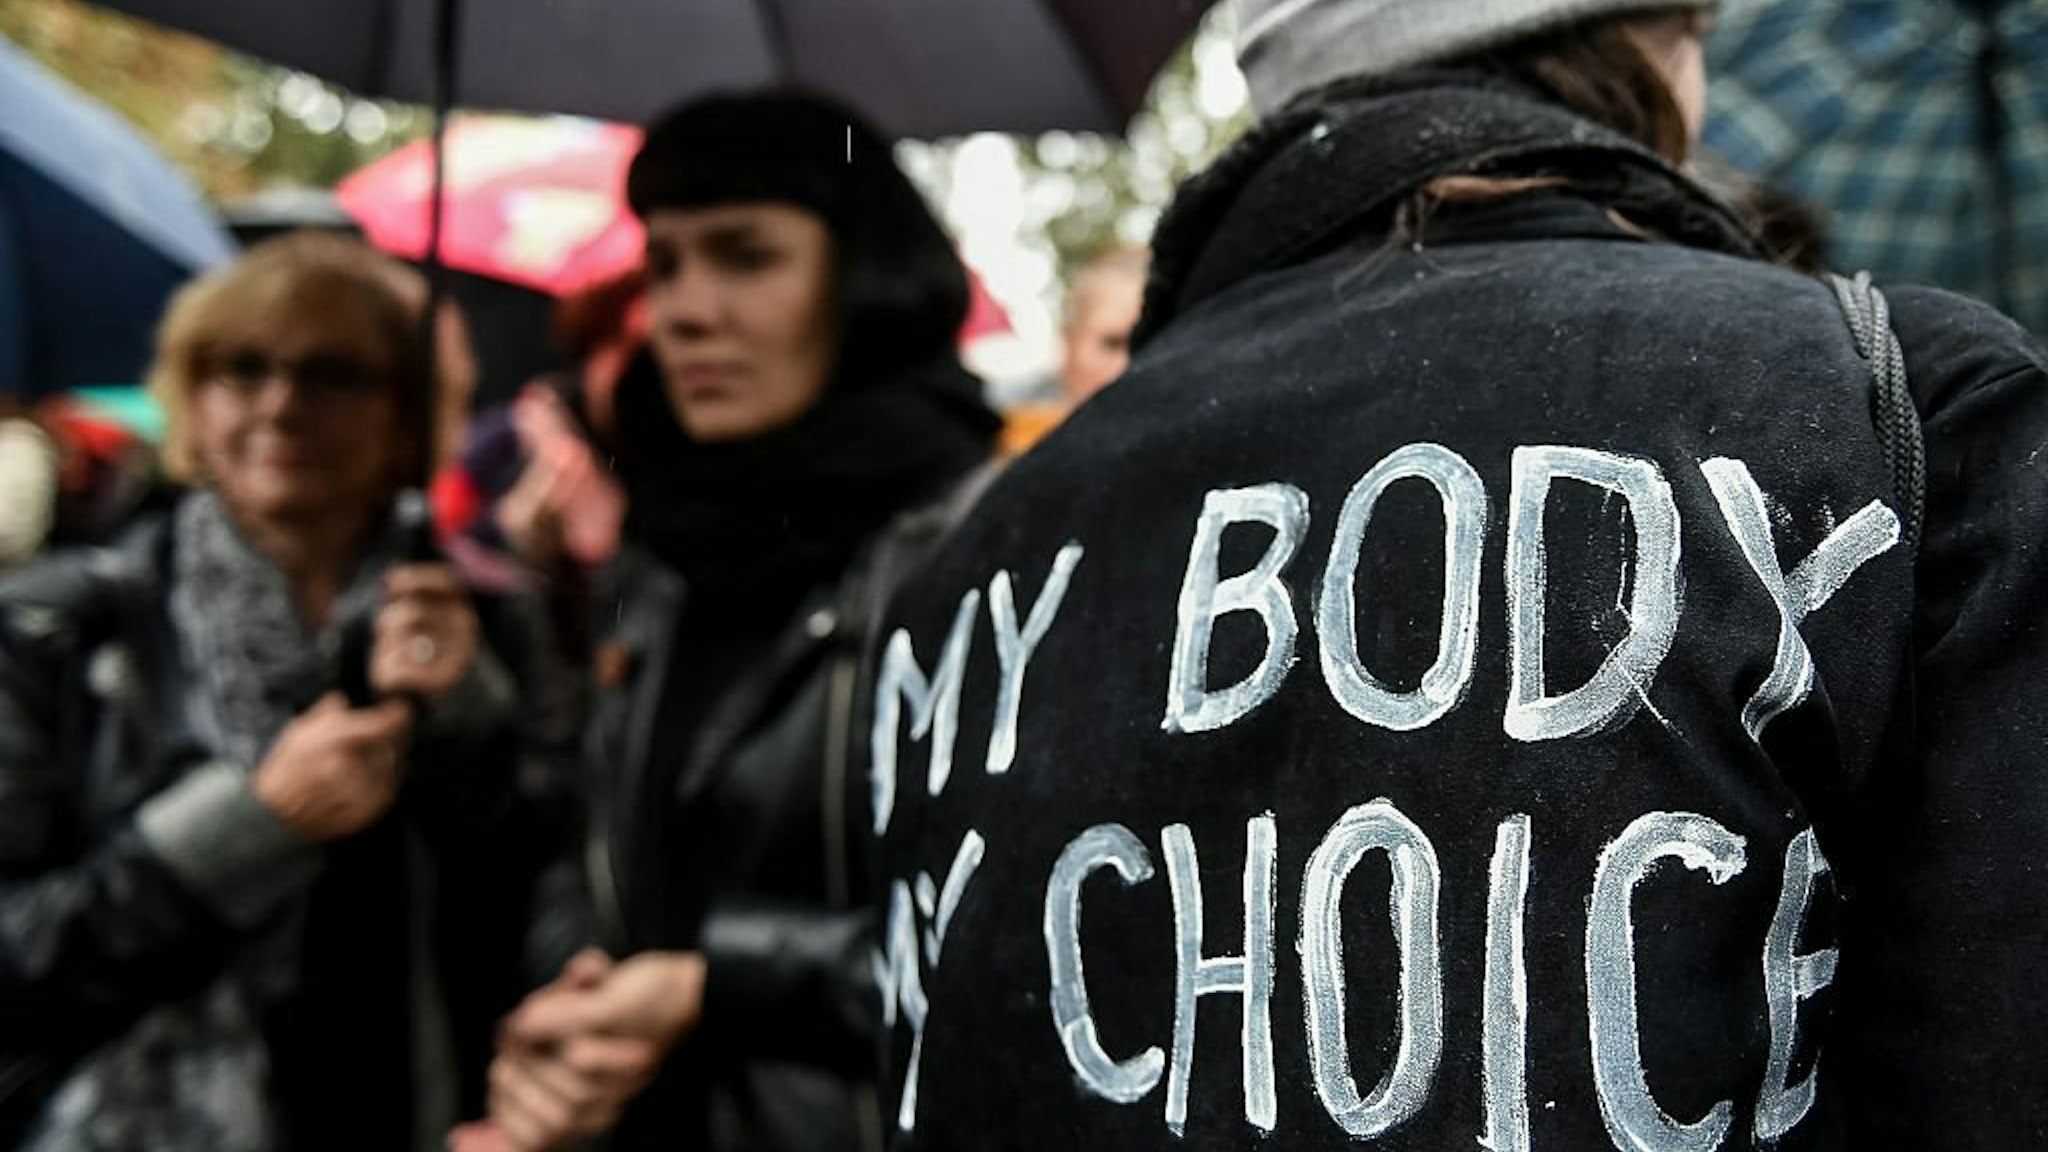 WARSAW, POLAND - OCTOBER 03: (SOUTH AFRICA AND POLAND OUT) Wwoman with an inscription on her jacket "My body, my choice" participates in the Black Monday, a nationwide women's pro-abortion protest on October 03, 2016 at Swietokrzyska Street in Warsaw, Pol